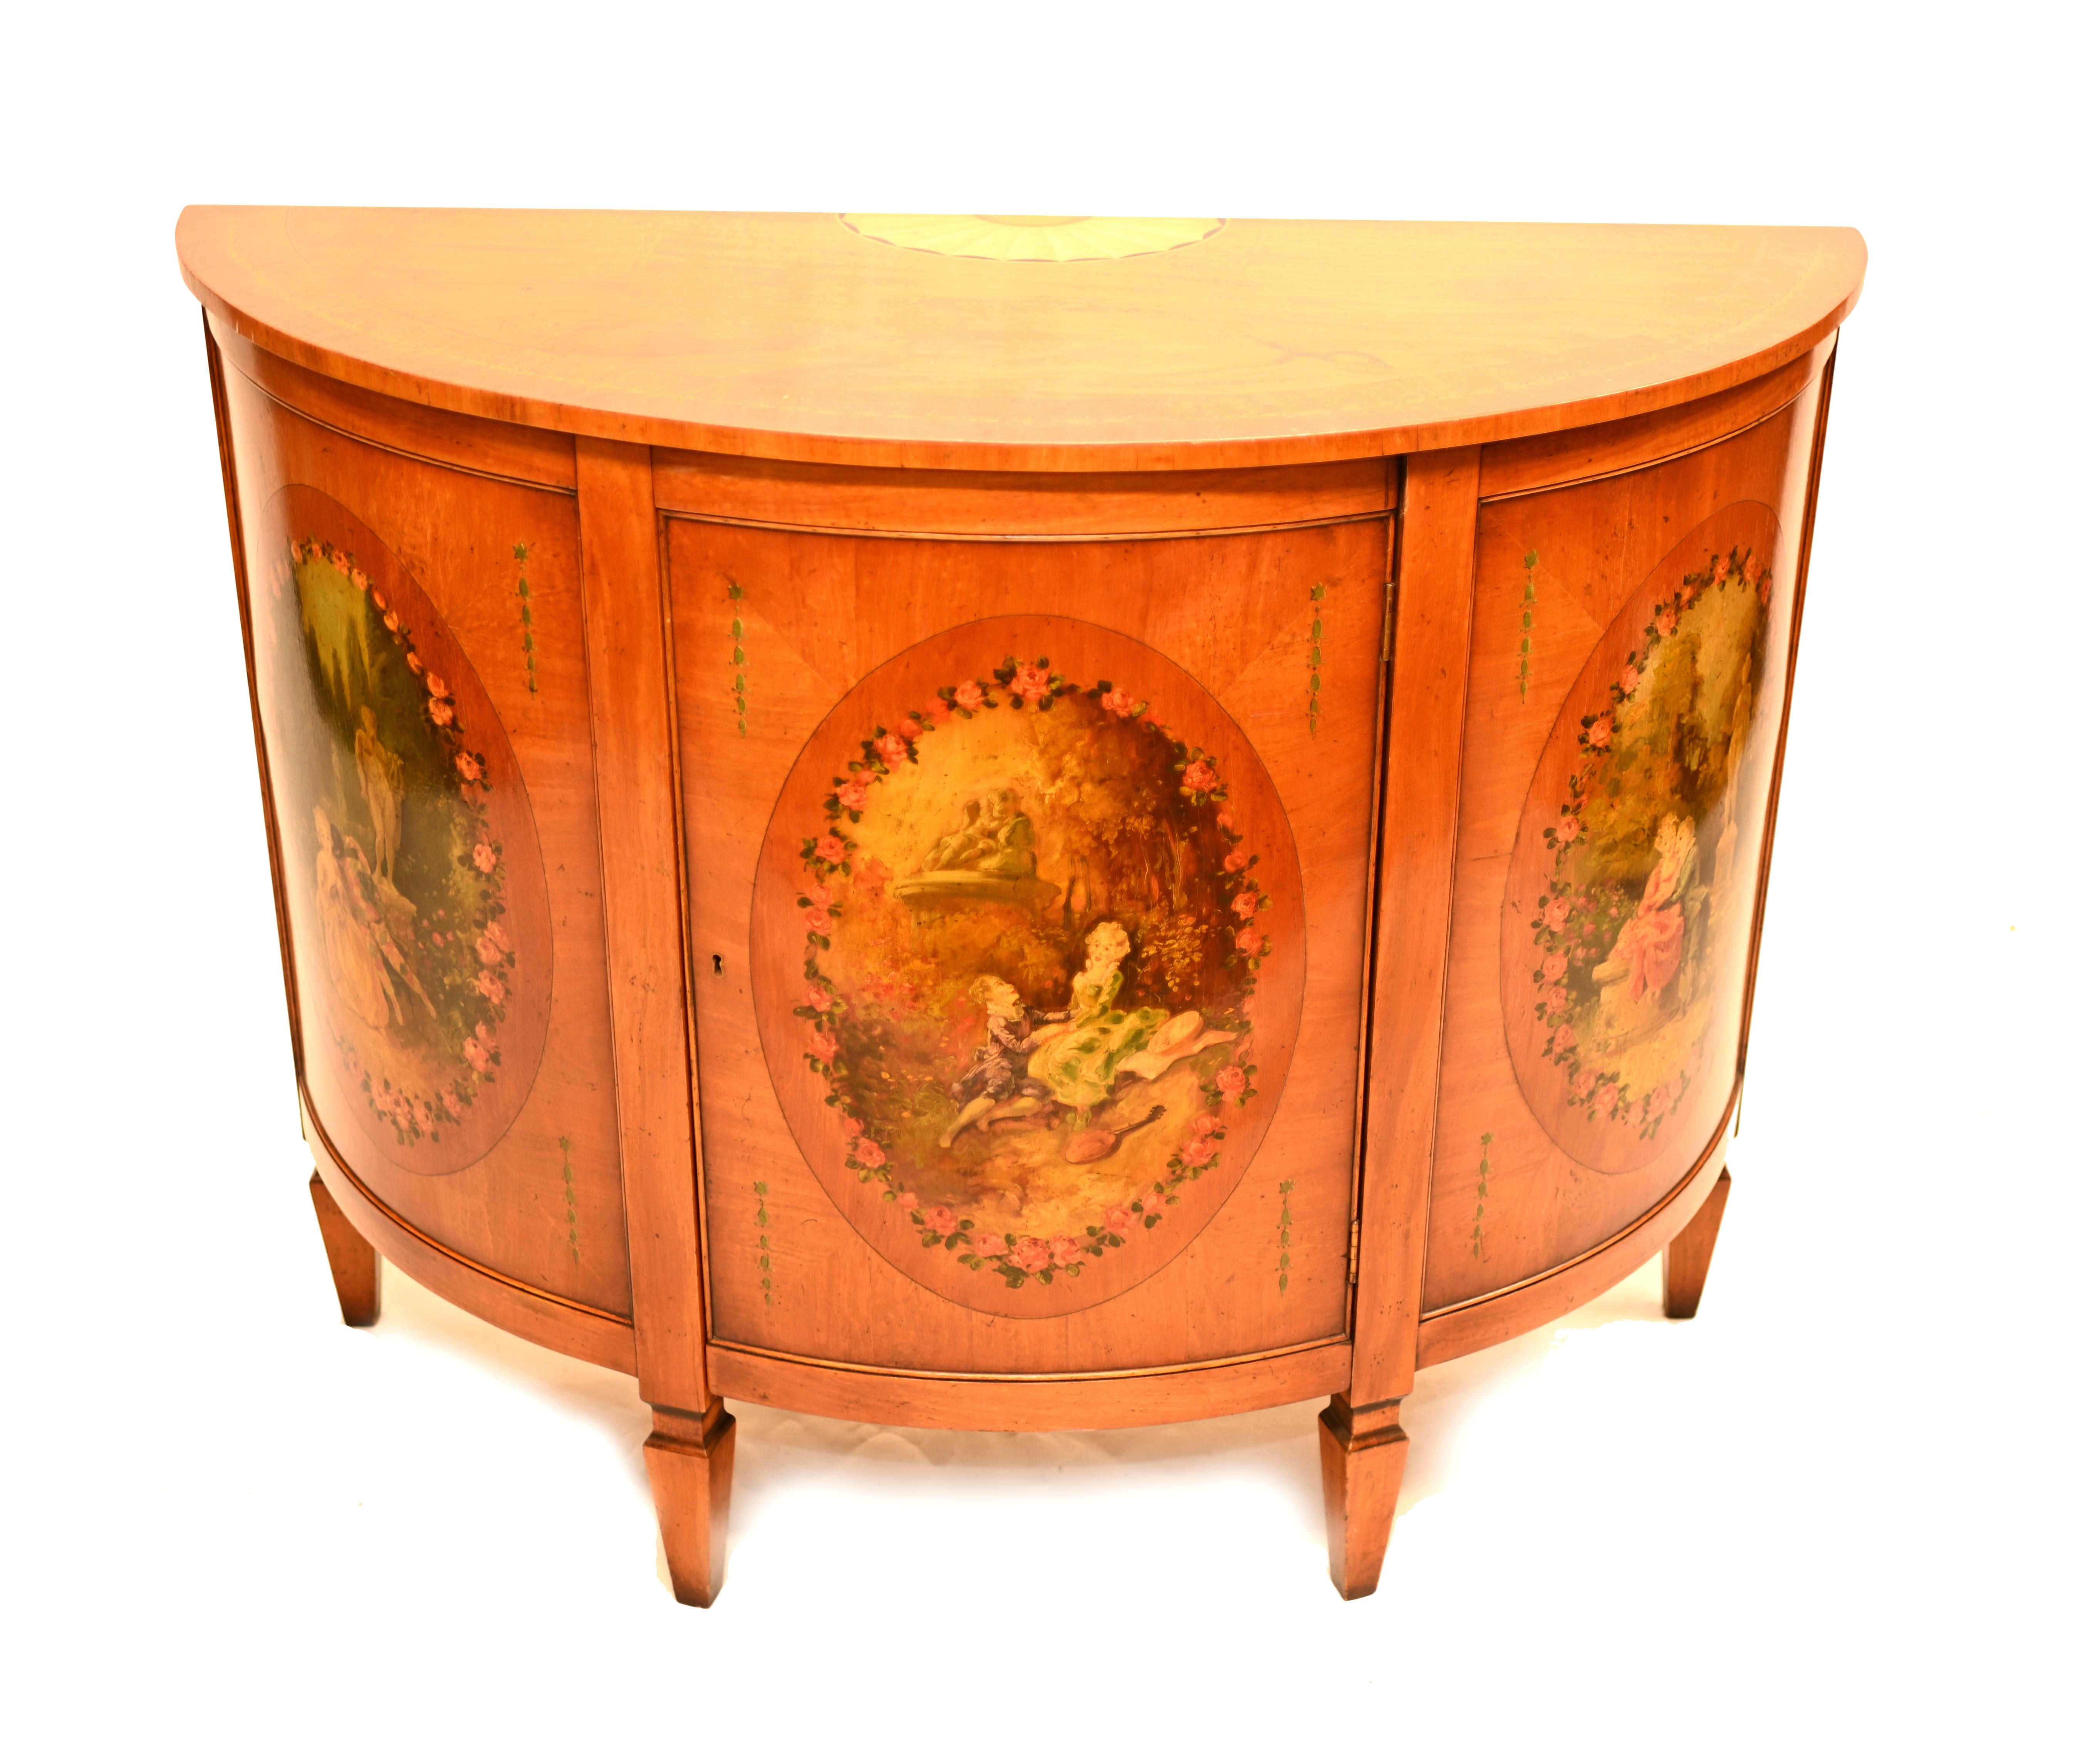 A Demilune satinwood commode painted the the Angelica Kaufman manner 
circa 1930
Painted features include romantic scenes of young lovers.
Bought from a dealer on Rue de Rossiers at the Paris antiques markets.

Offered in great shape ready for